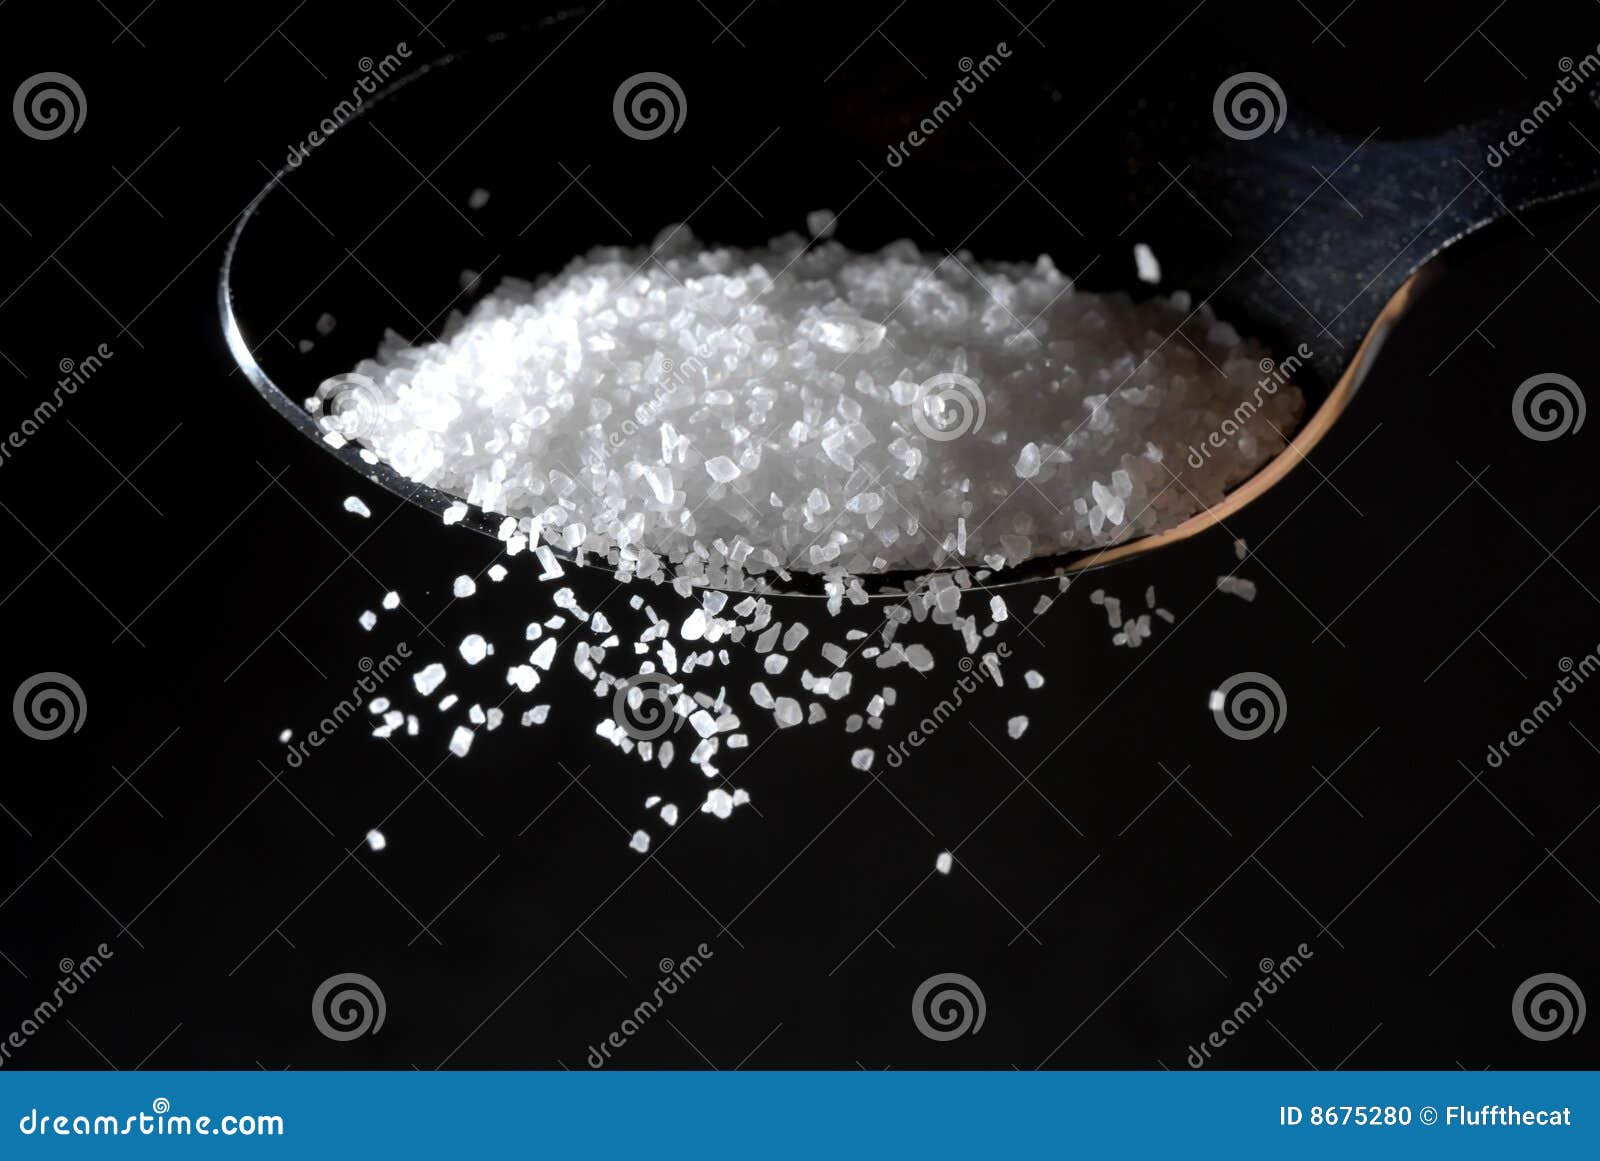 a sprinkle of salt from a spoon